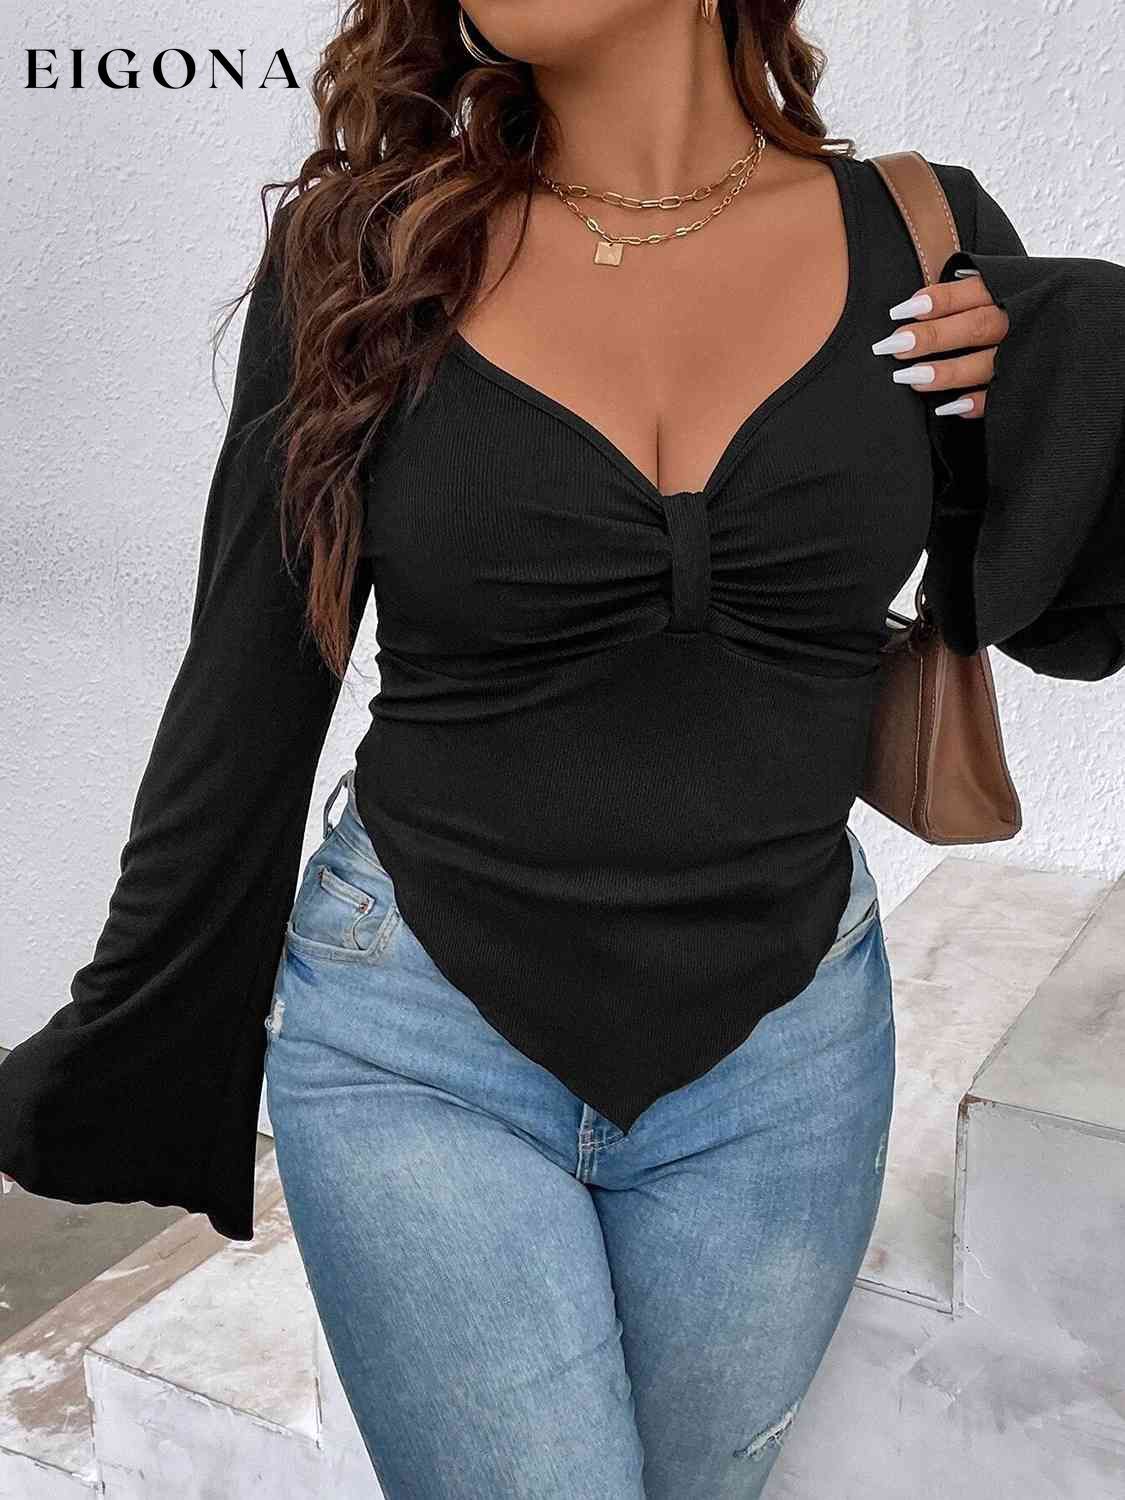 Plunge Flare Sleeve Top clothes long sleeve shirt long sleeve shirts long sleeve top long sleeve tops Ship From Overseas shirt shirts top tops Y@Q@S